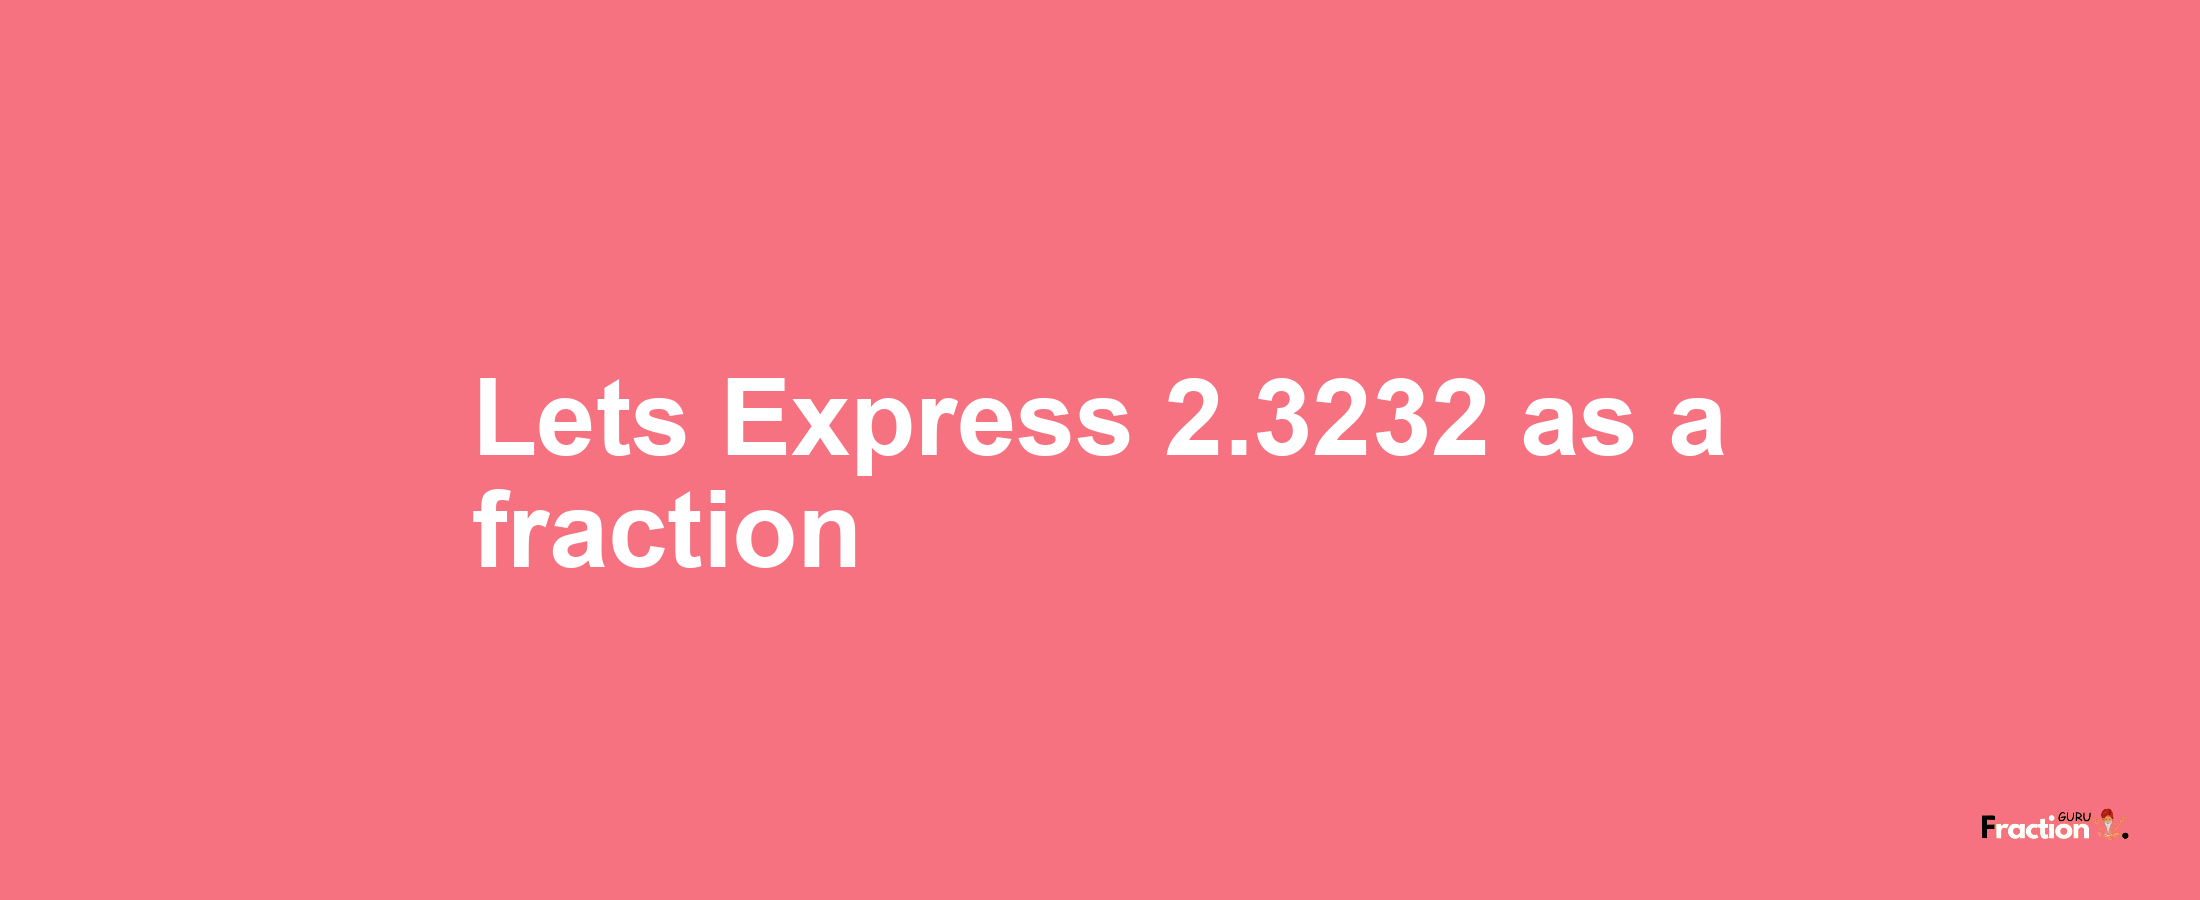 Lets Express 2.3232 as afraction